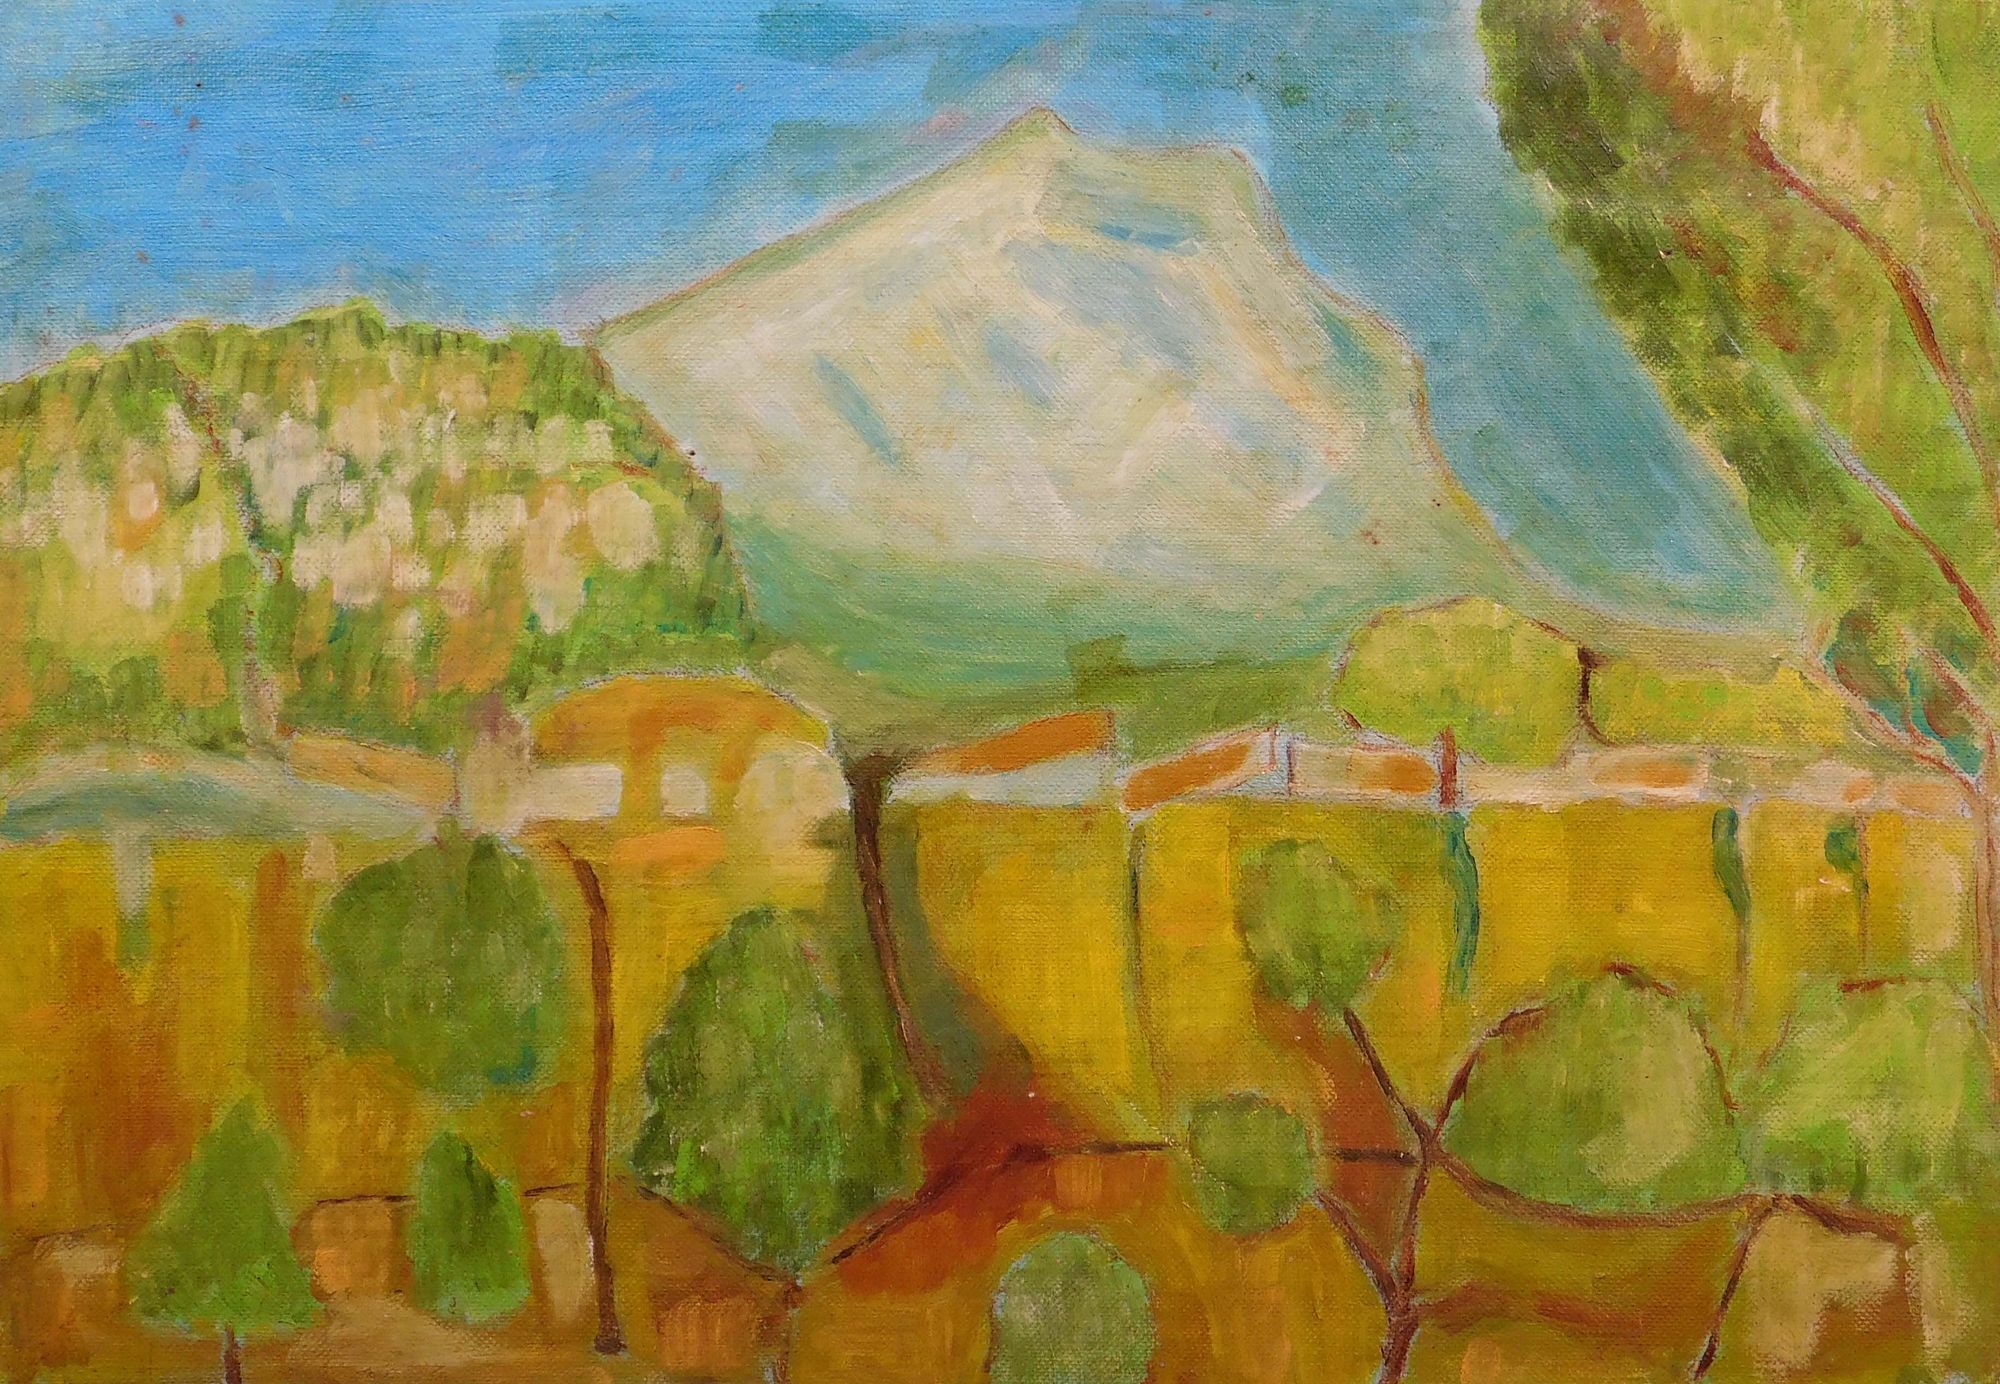 Artwork by Emile Bernard, Paysage, Made of Oil on academy board canvas that has been removed from board